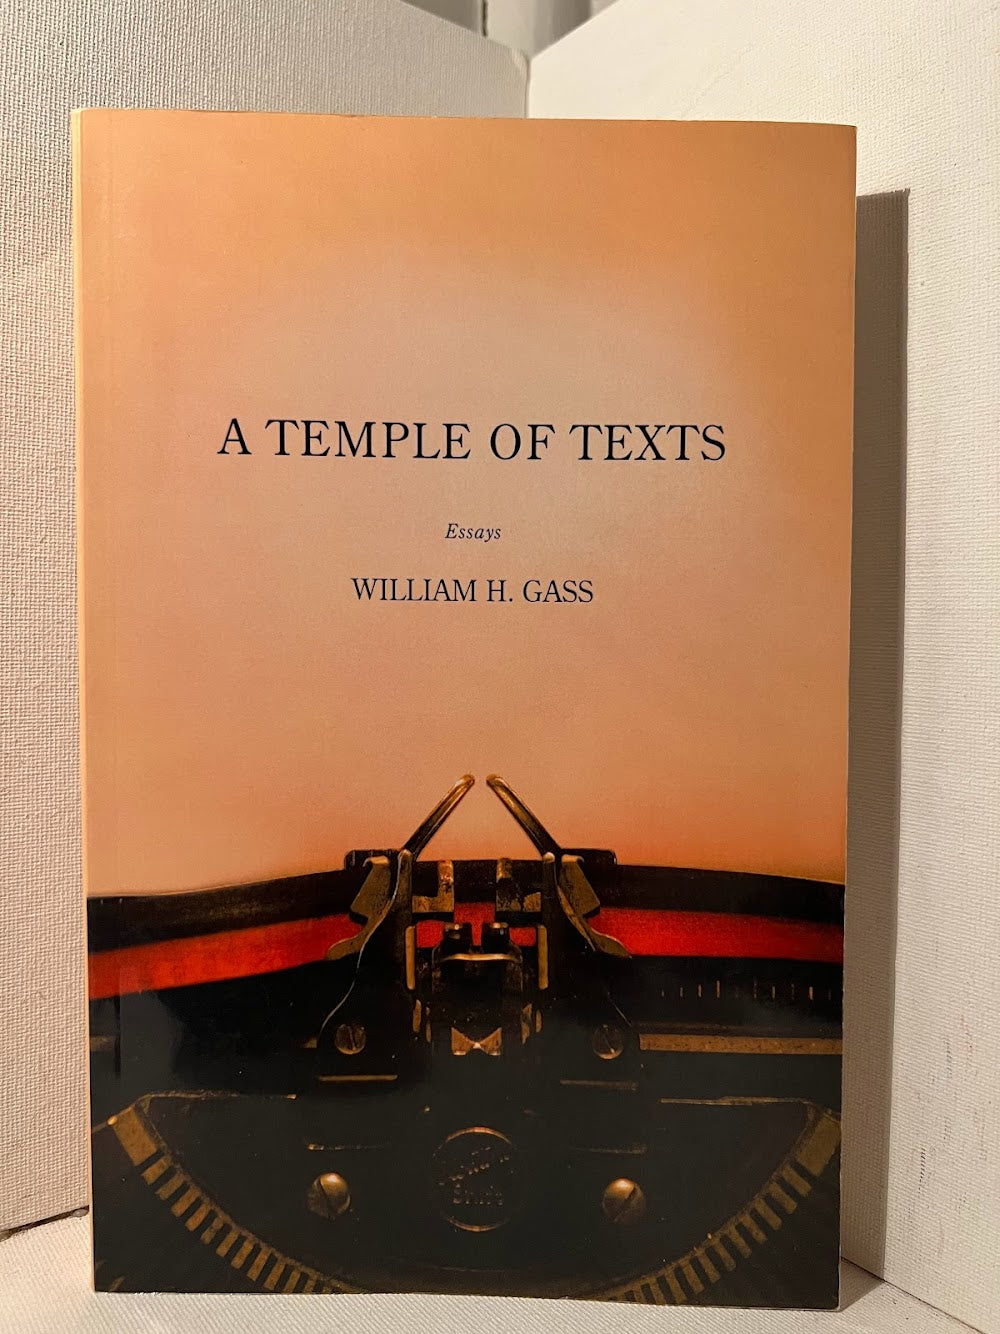 A Temple of Texts by William H. Gass